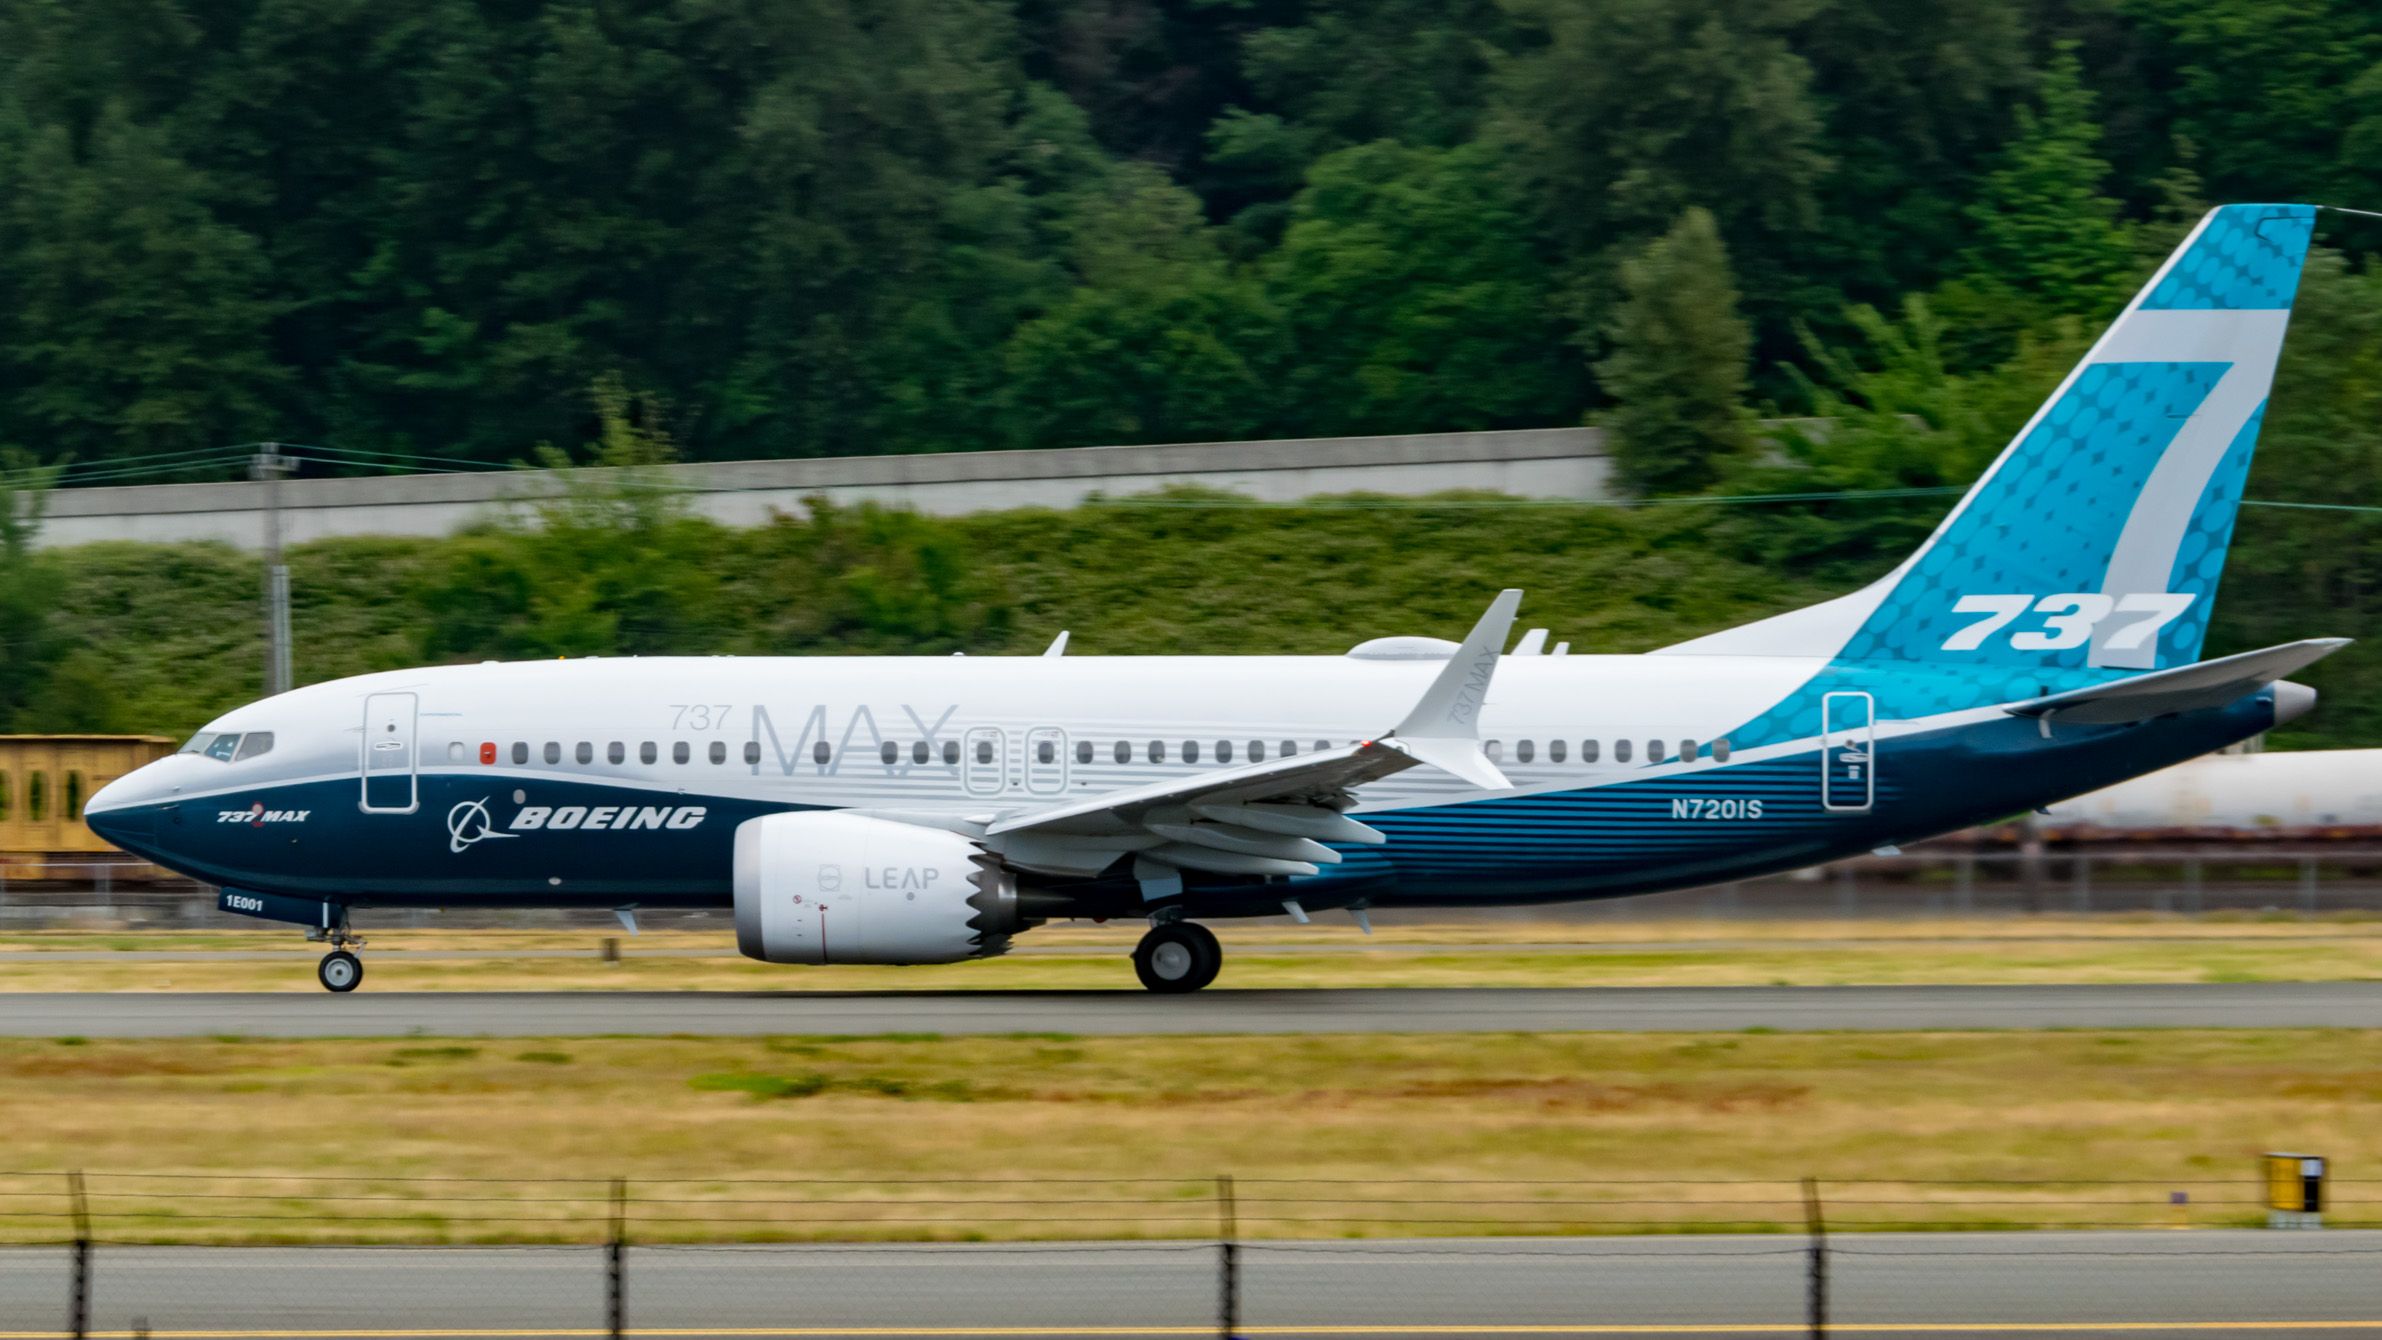 737 MAX 7 Heading Out on 2018-06-16 Test Flight From KBFI